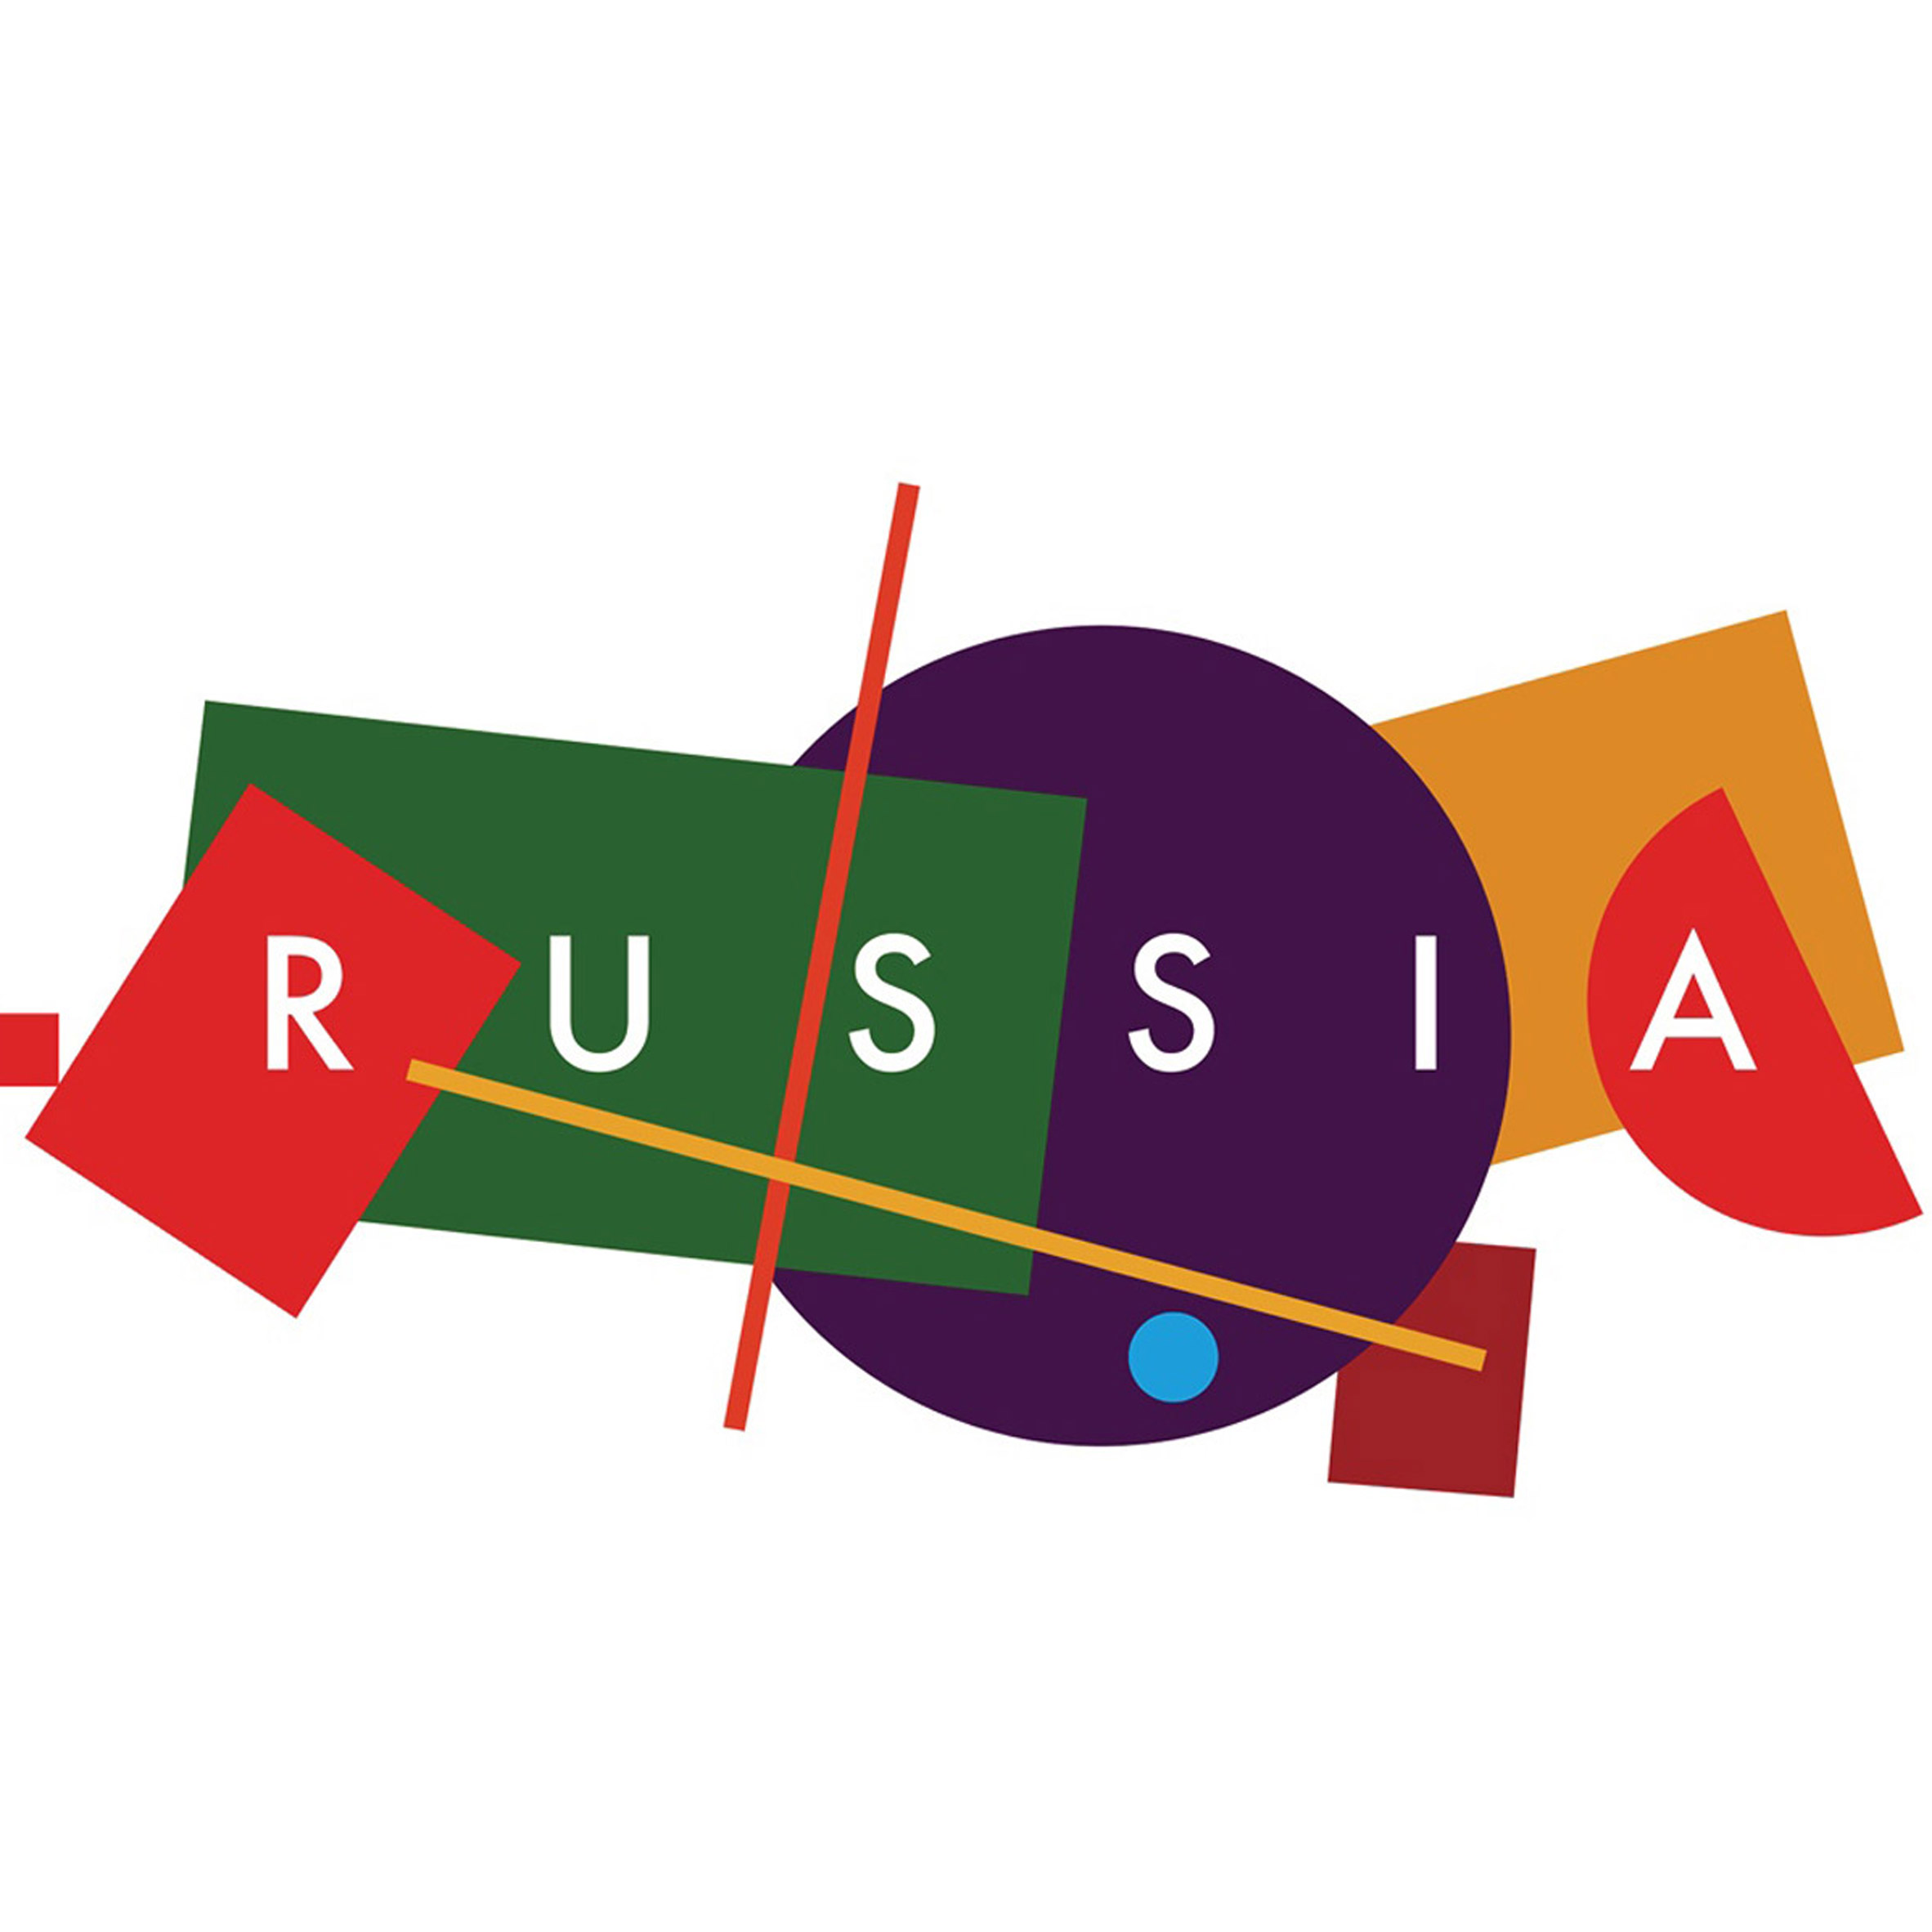 Russian tourist board unveils new visual identity inspired by suprematist art